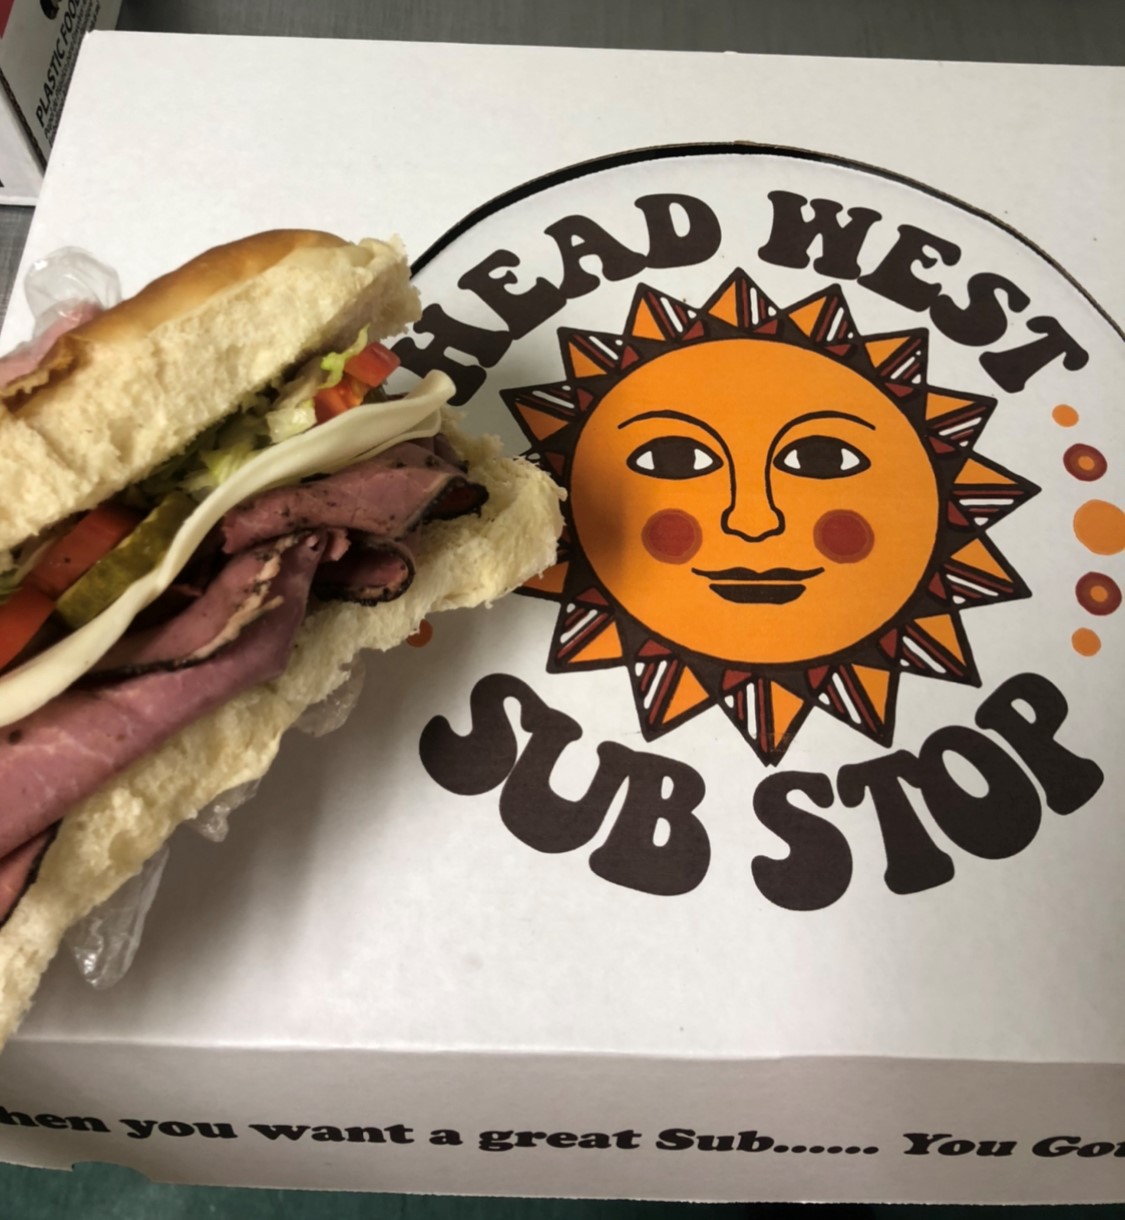 Head West Sub Shop - Southern View